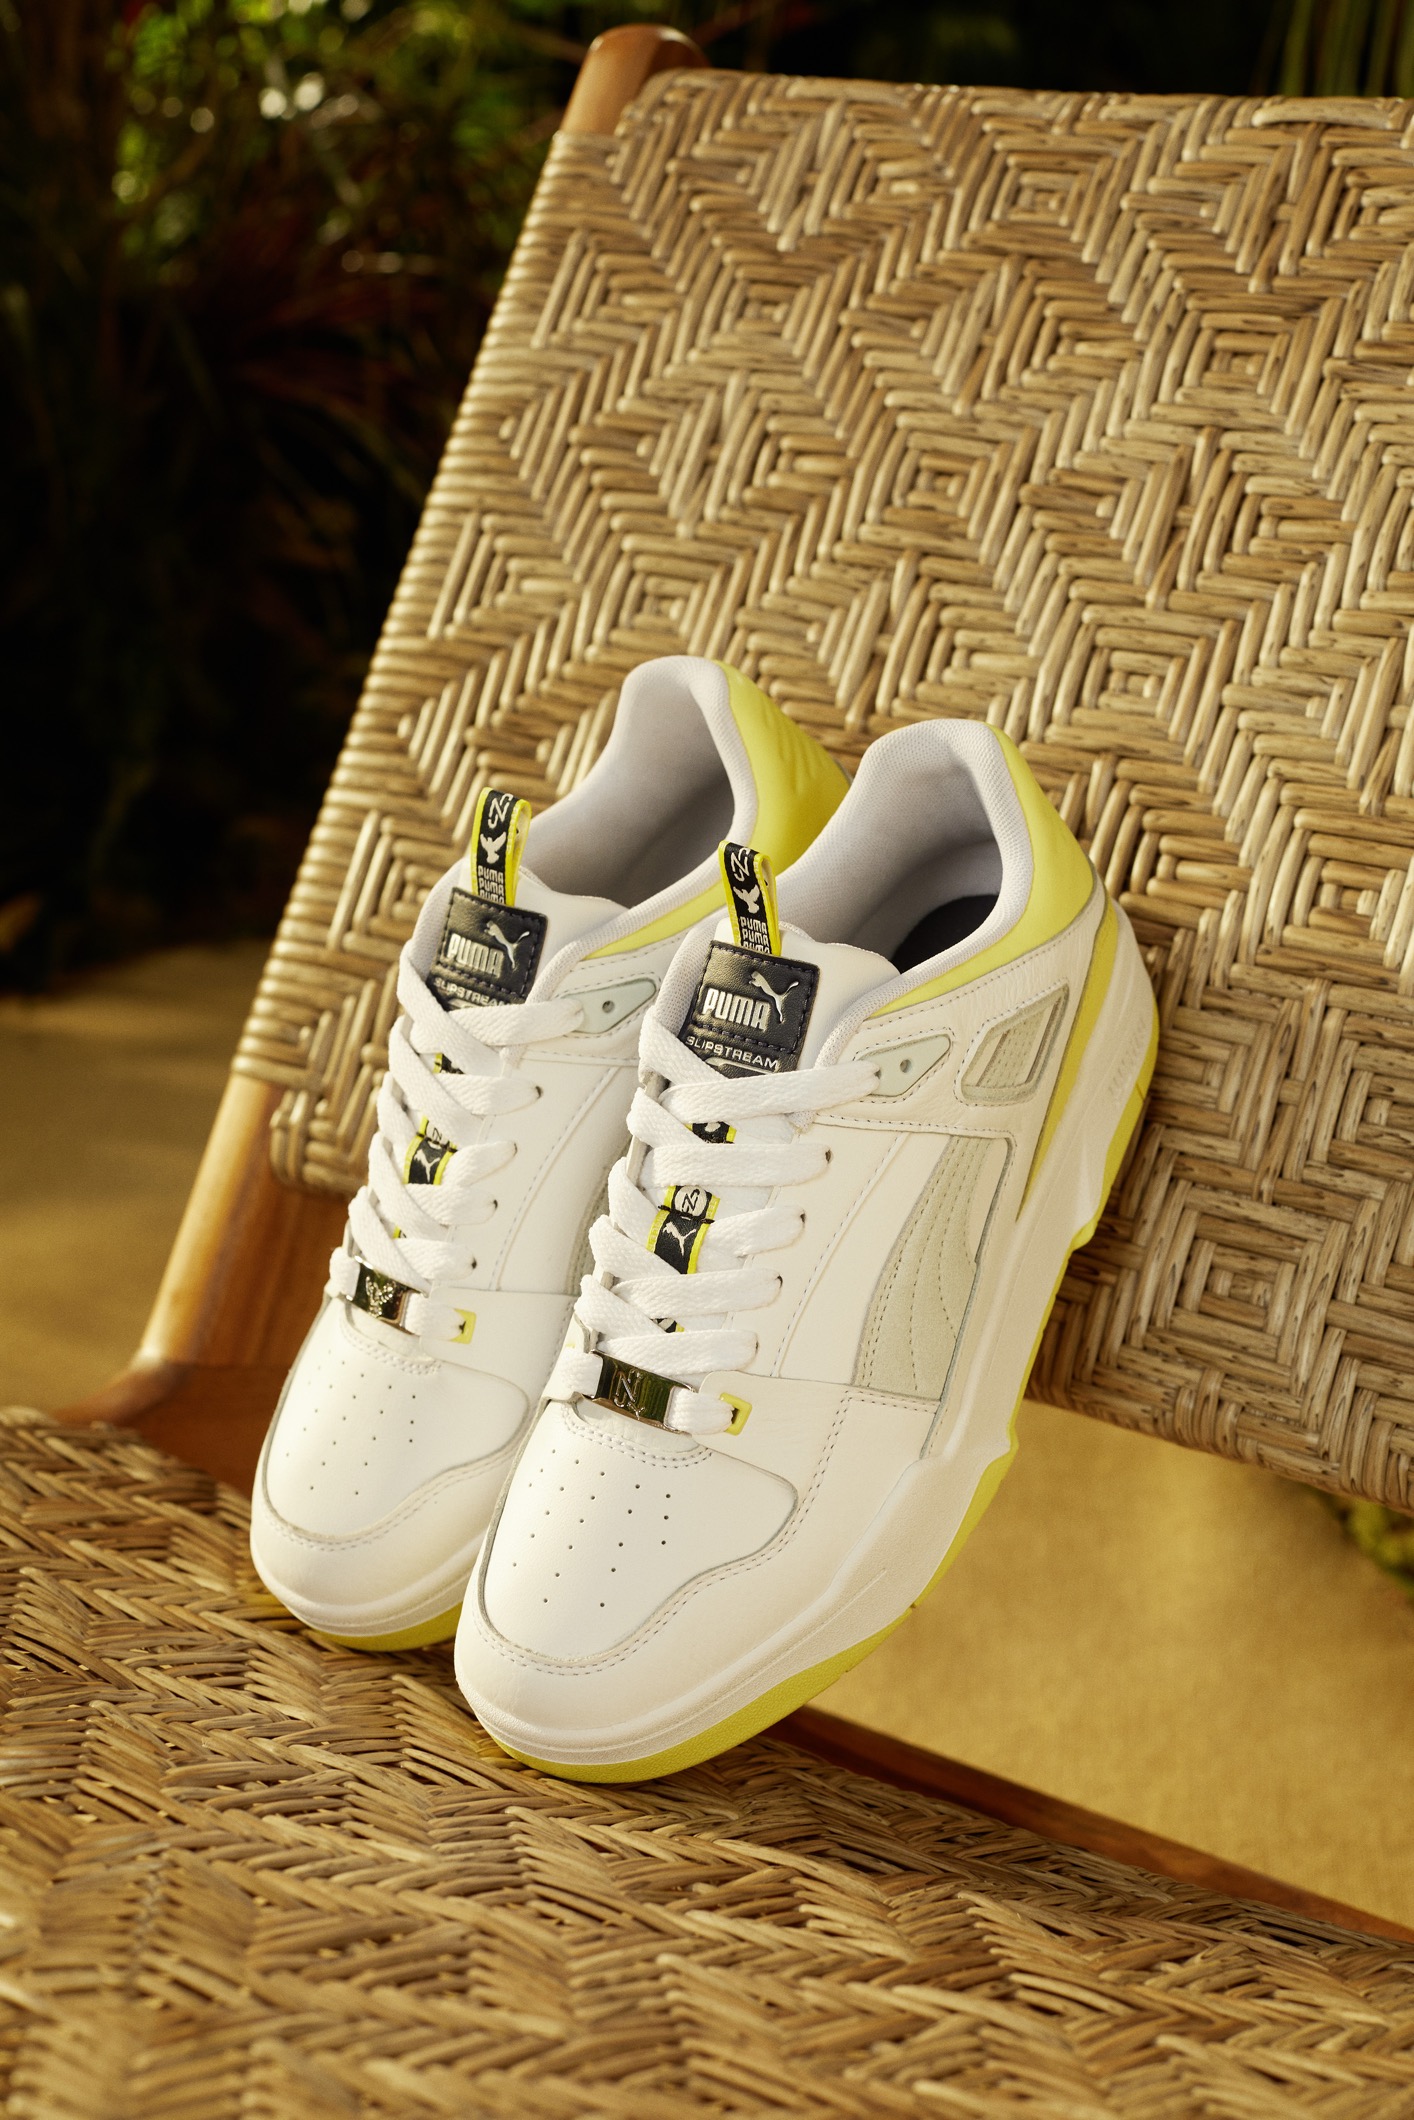 Neymar's Latest Collaboration With PUMA Is An Ode To Brazilian